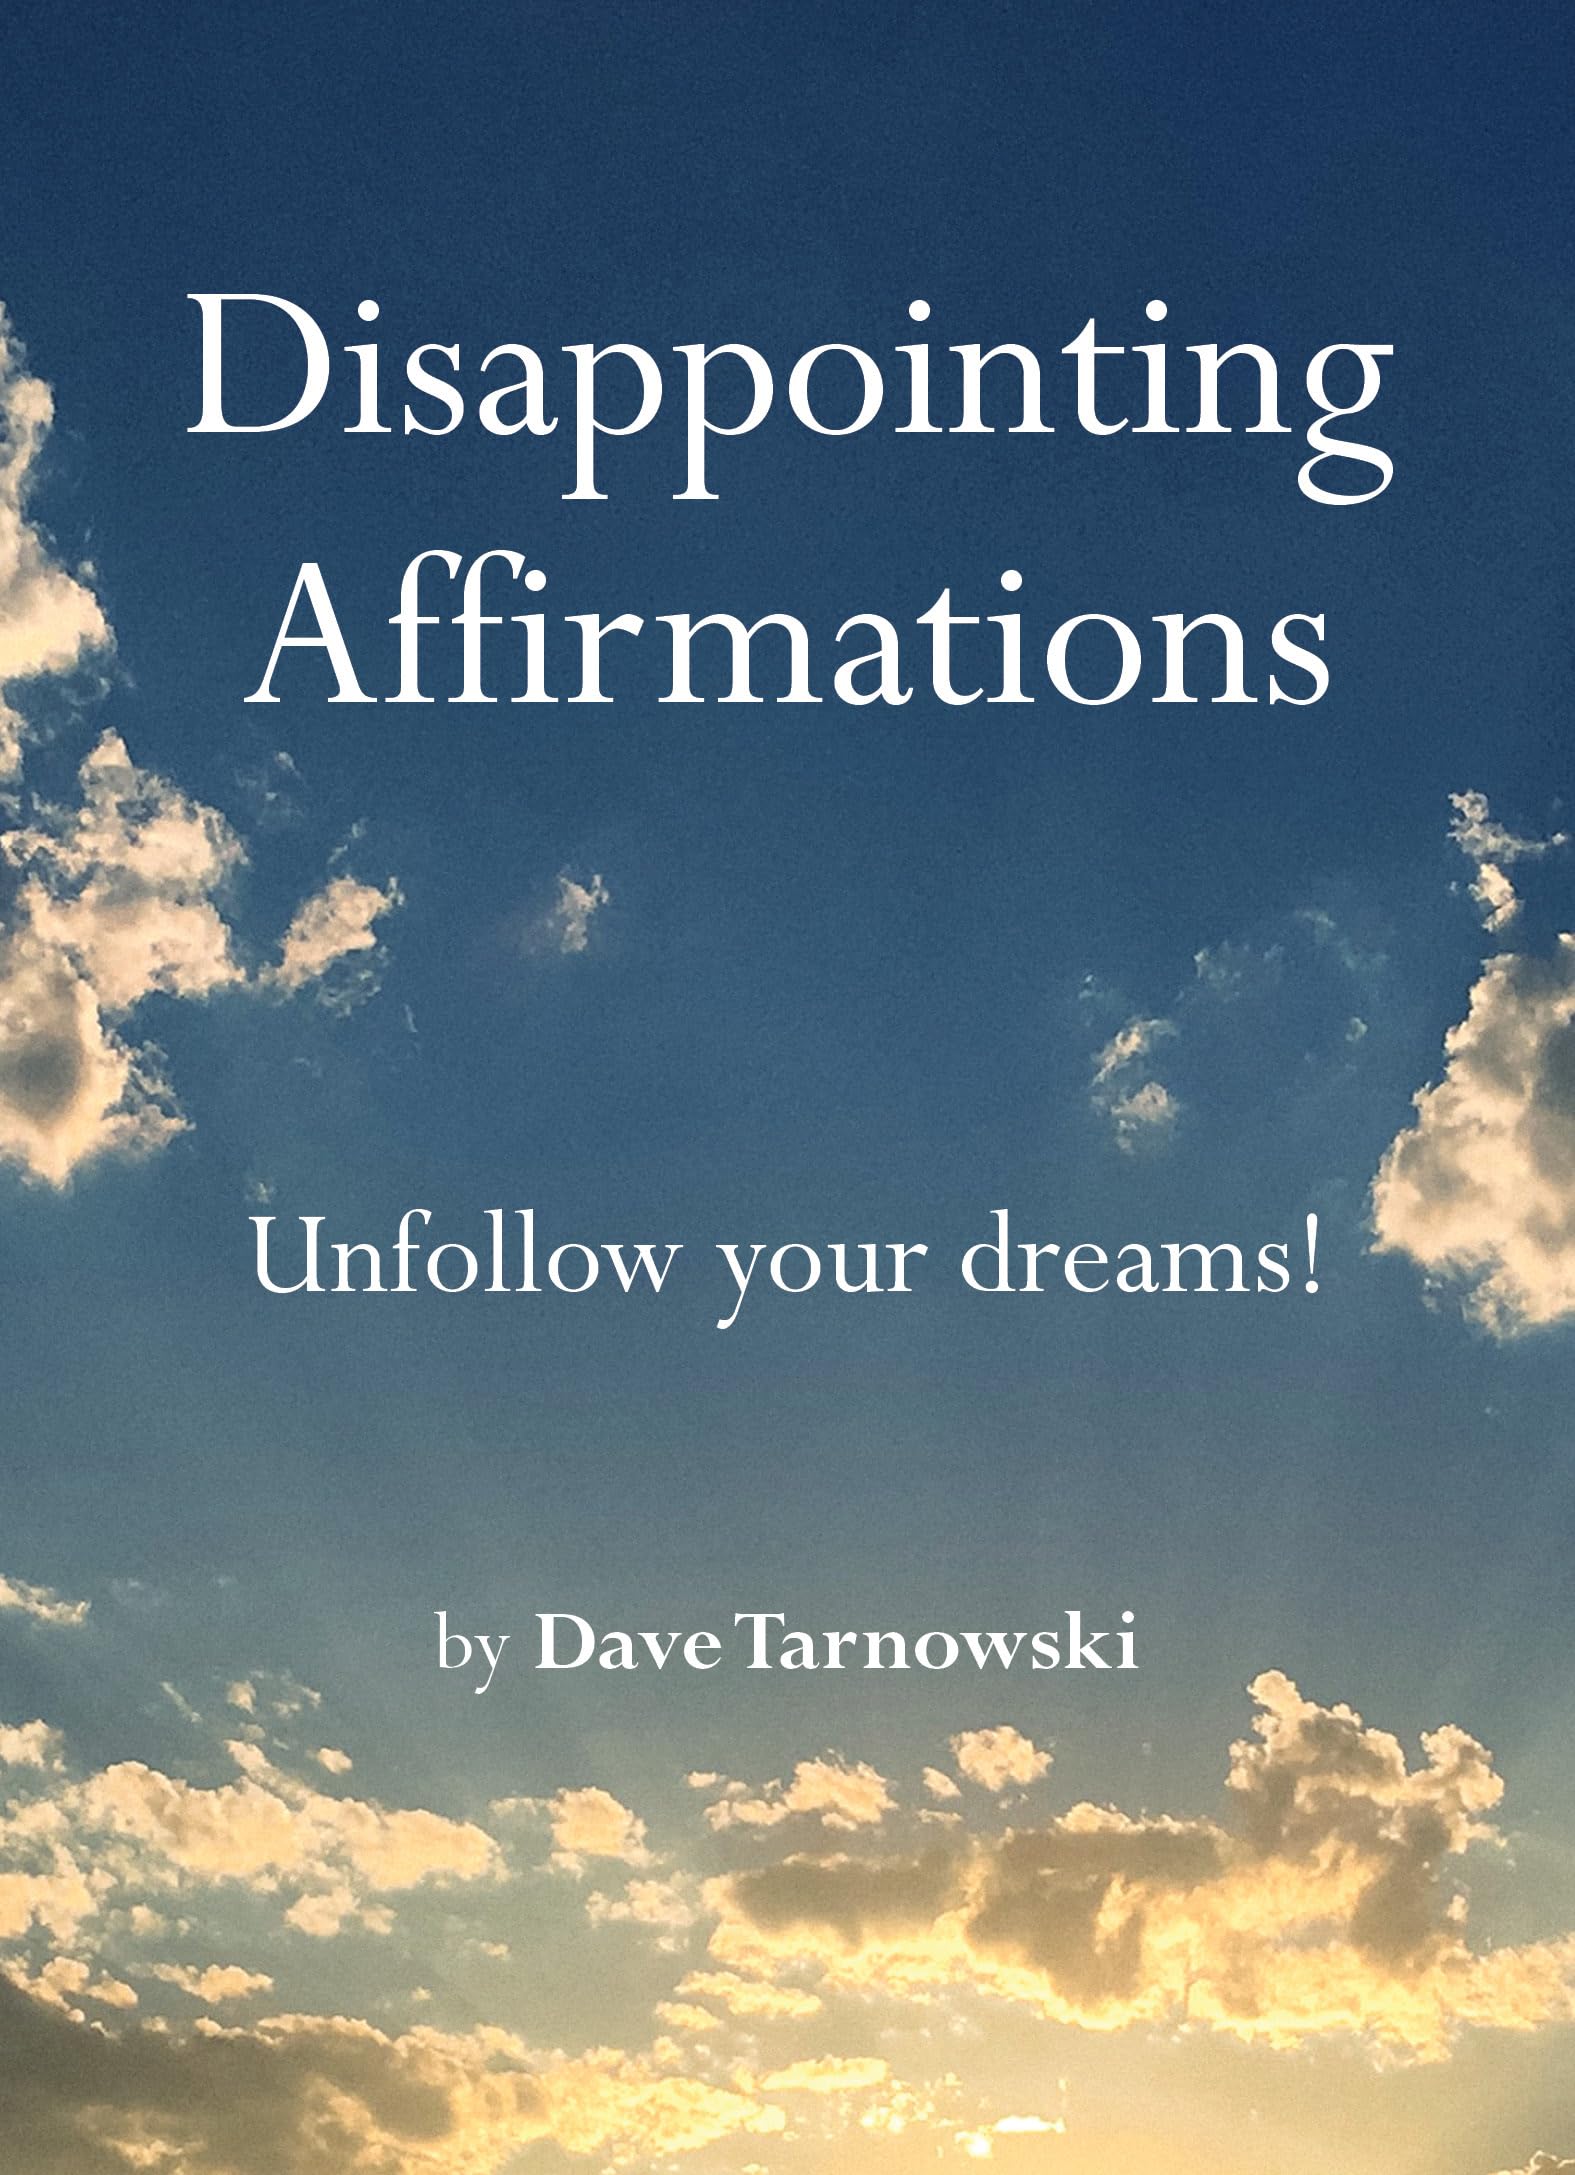 Disappointing Affirmations Book: Unfollow your Dreams!